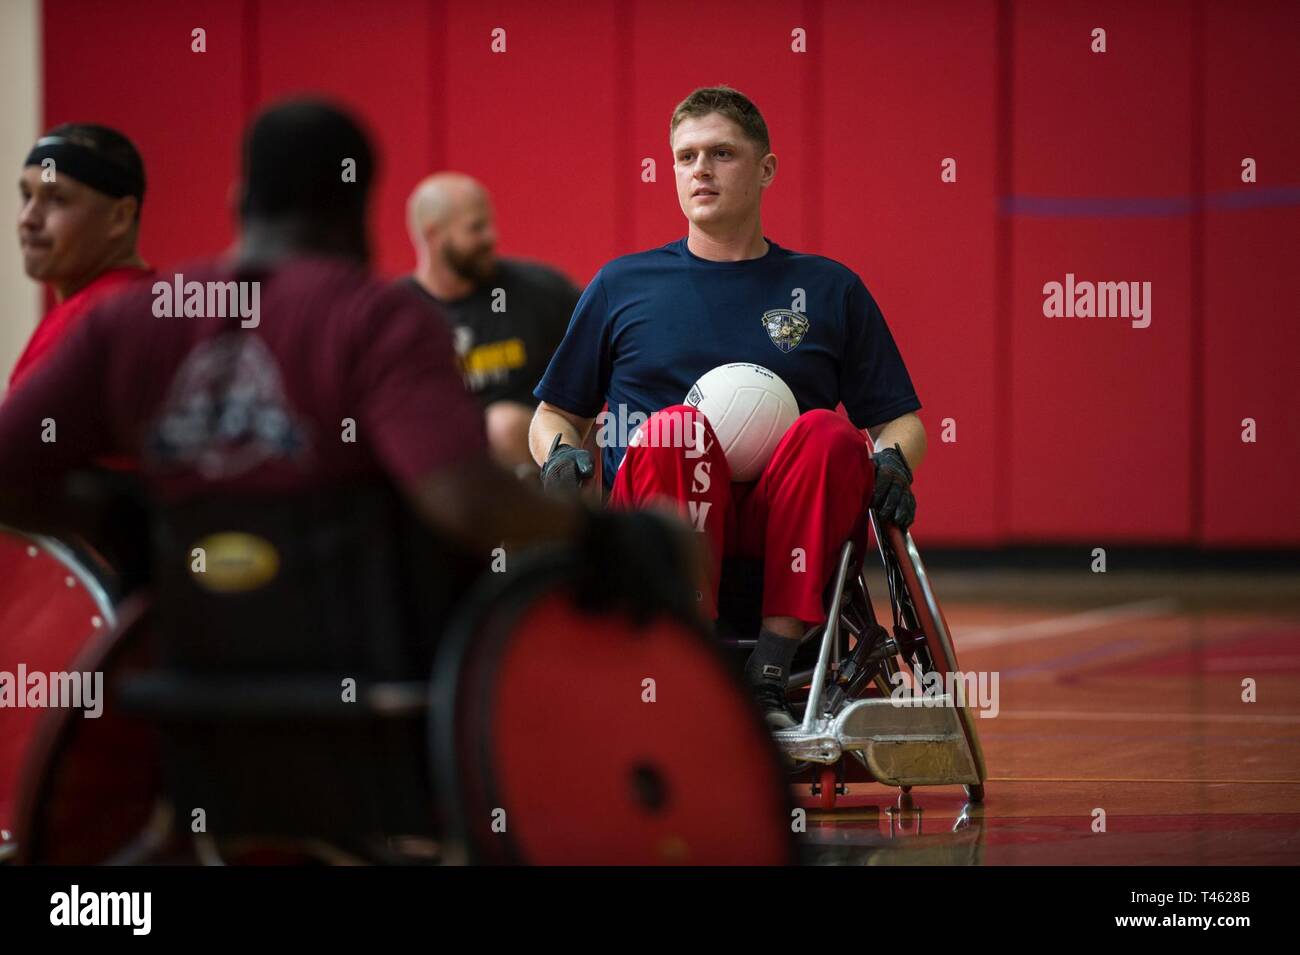 A U.S. Marine Corps athlete practices wheelchair rugby during the 2019 Marine Corps Trials at Marine Corps Base Camp Pendleton, California, Feb. 28. The Marine Corps Trials promotes recovery and rehabilitation through adaptive sports participation and develops camaraderie among recovering service members and veterans. Additionally, the competition is an opportunity for participants to demonstrate physical and mental achievements and serves as the primary venue to select Marine Corps participants for the DoD Warrior Games. Stock Photo